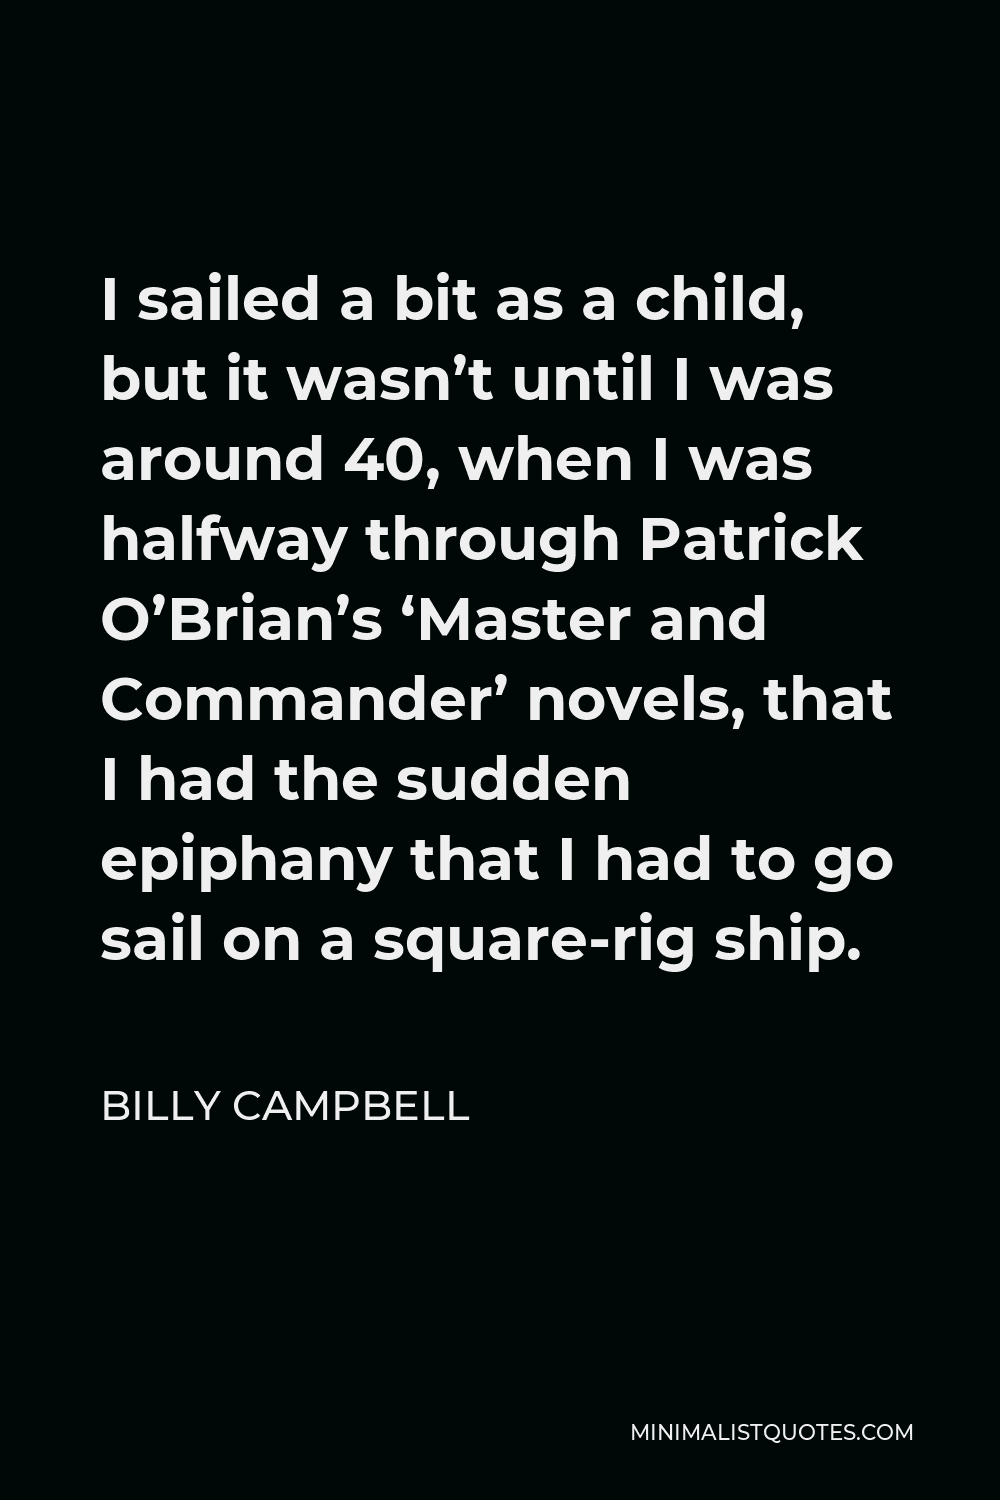 Billy Campbell Quote - I sailed a bit as a child, but it wasn’t until I was around 40, when I was halfway through Patrick O’Brian’s ‘Master and Commander’ novels, that I had the sudden epiphany that I had to go sail on a square-rig ship.